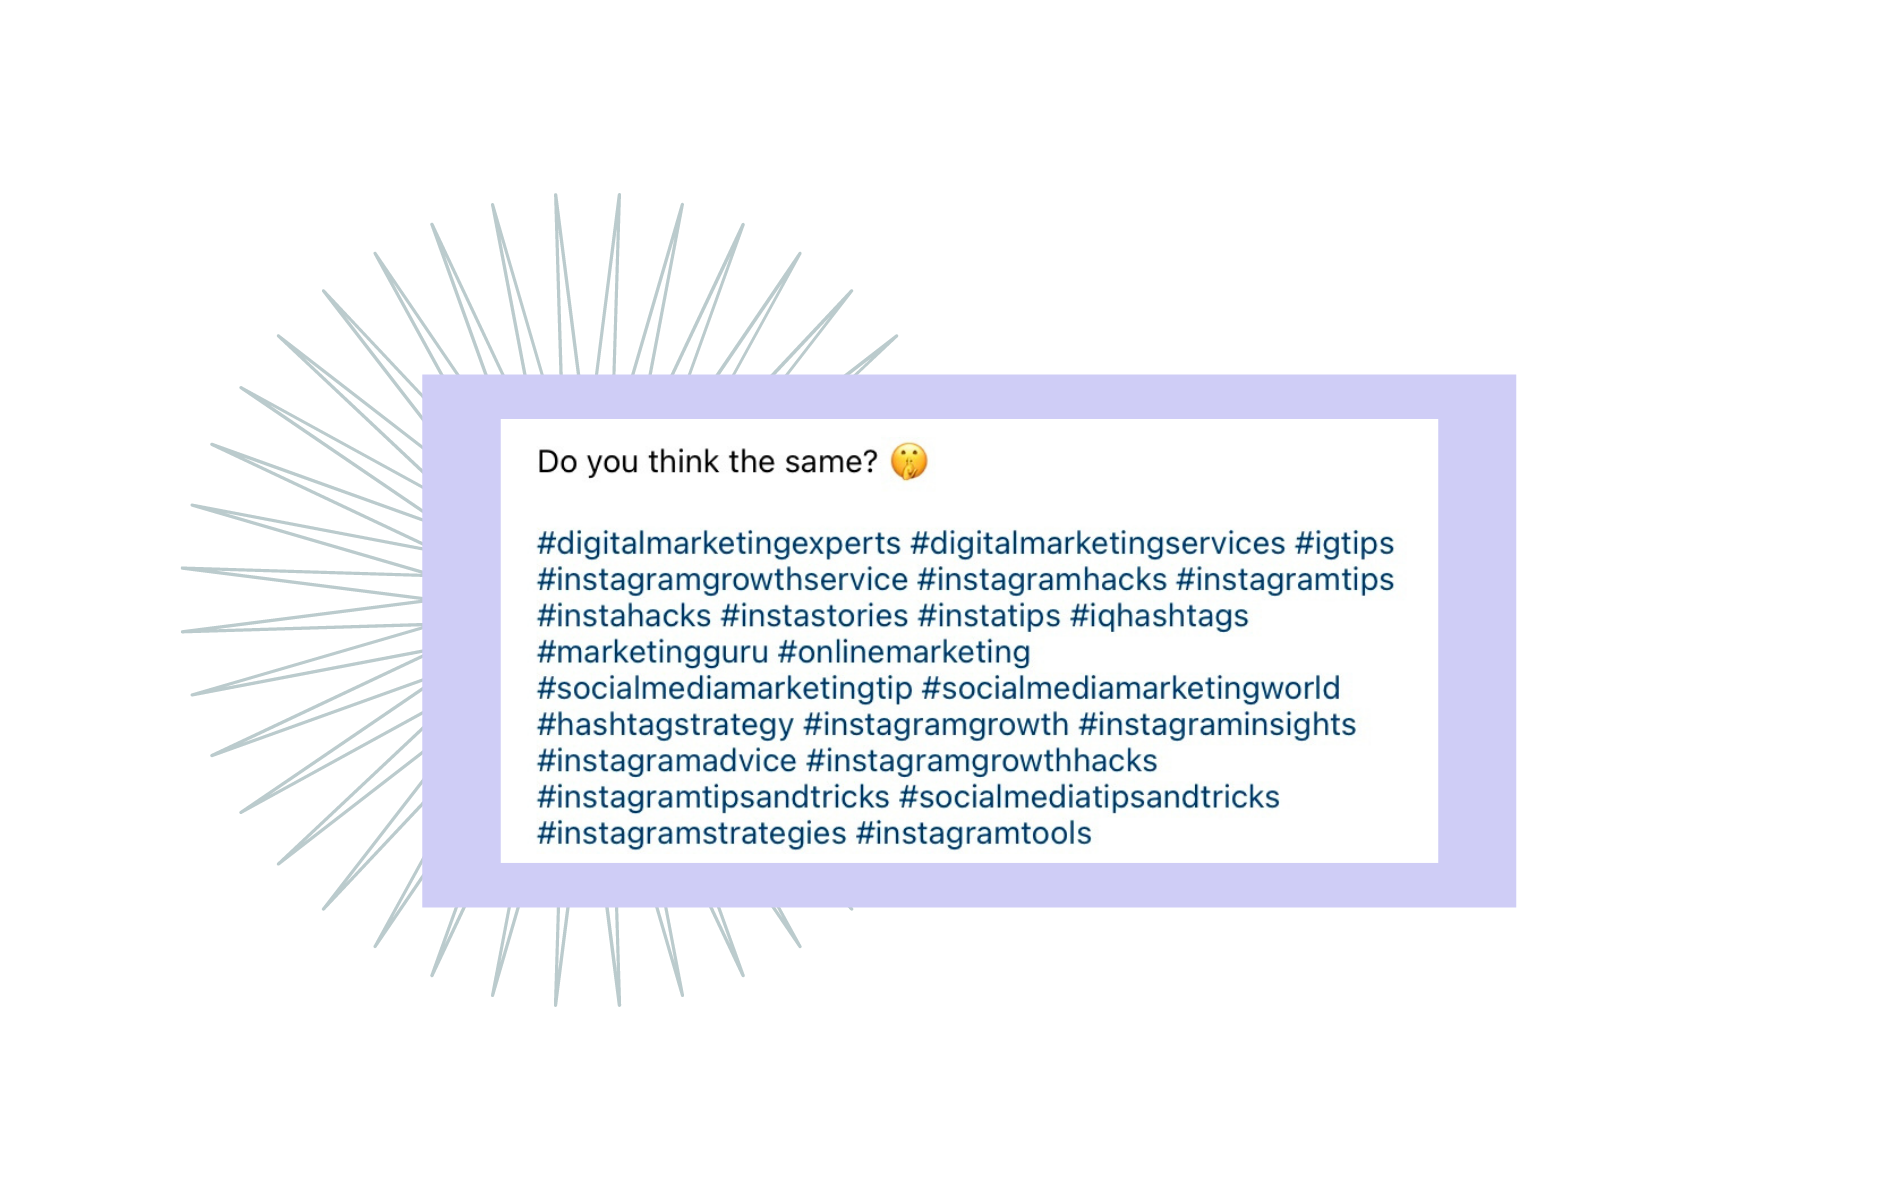 How to See Someone's New Followers on Instagram: Secret Solutions -  IQhashtags - Instagram hashtag search tool